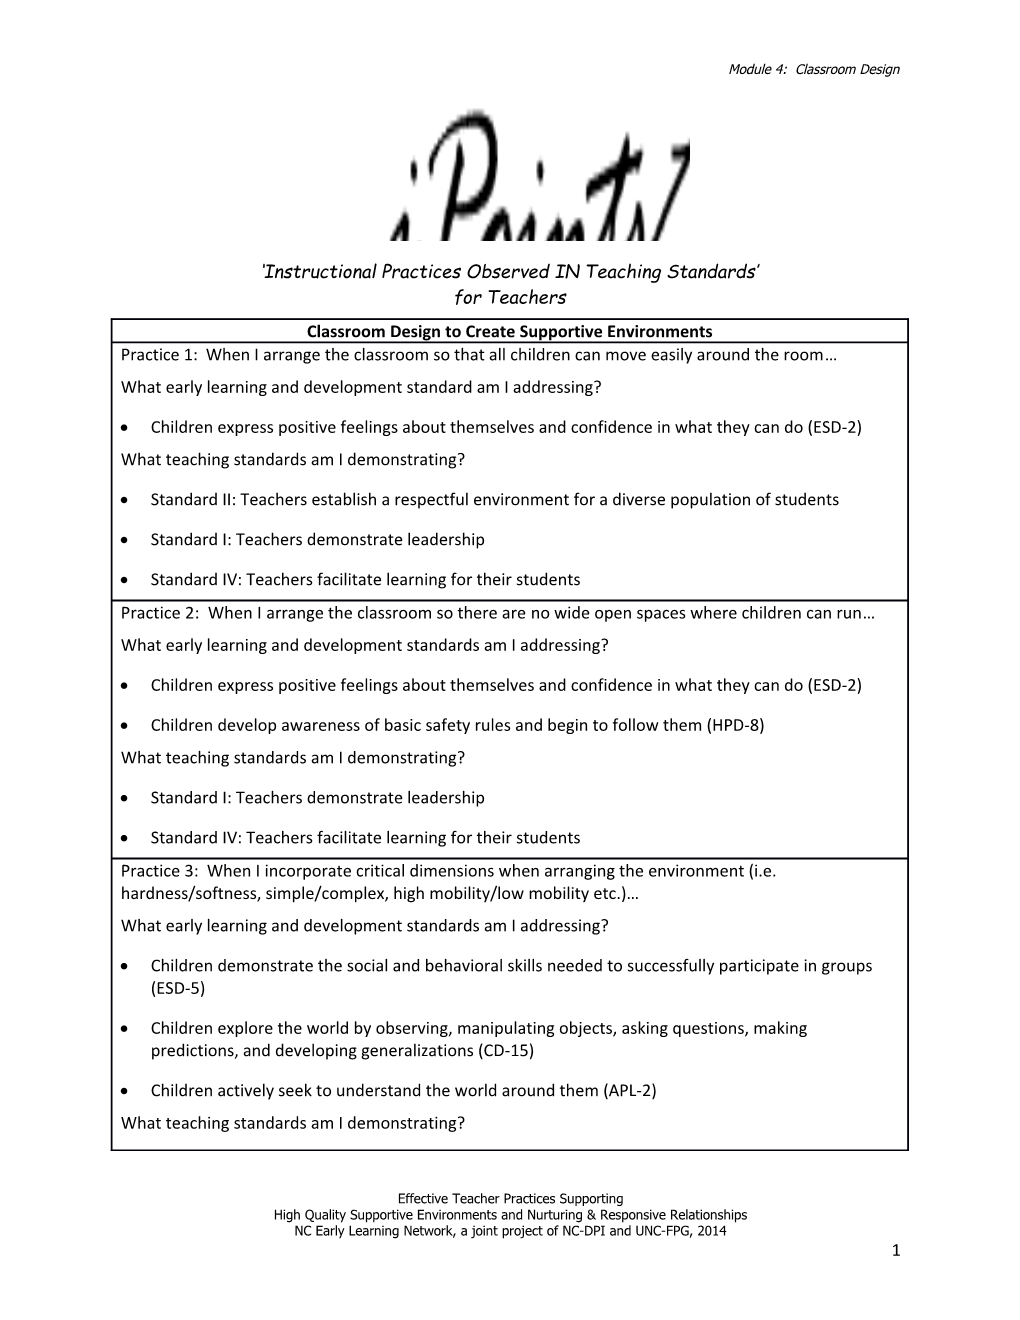 Instructional Practices Observed in Teaching Standards